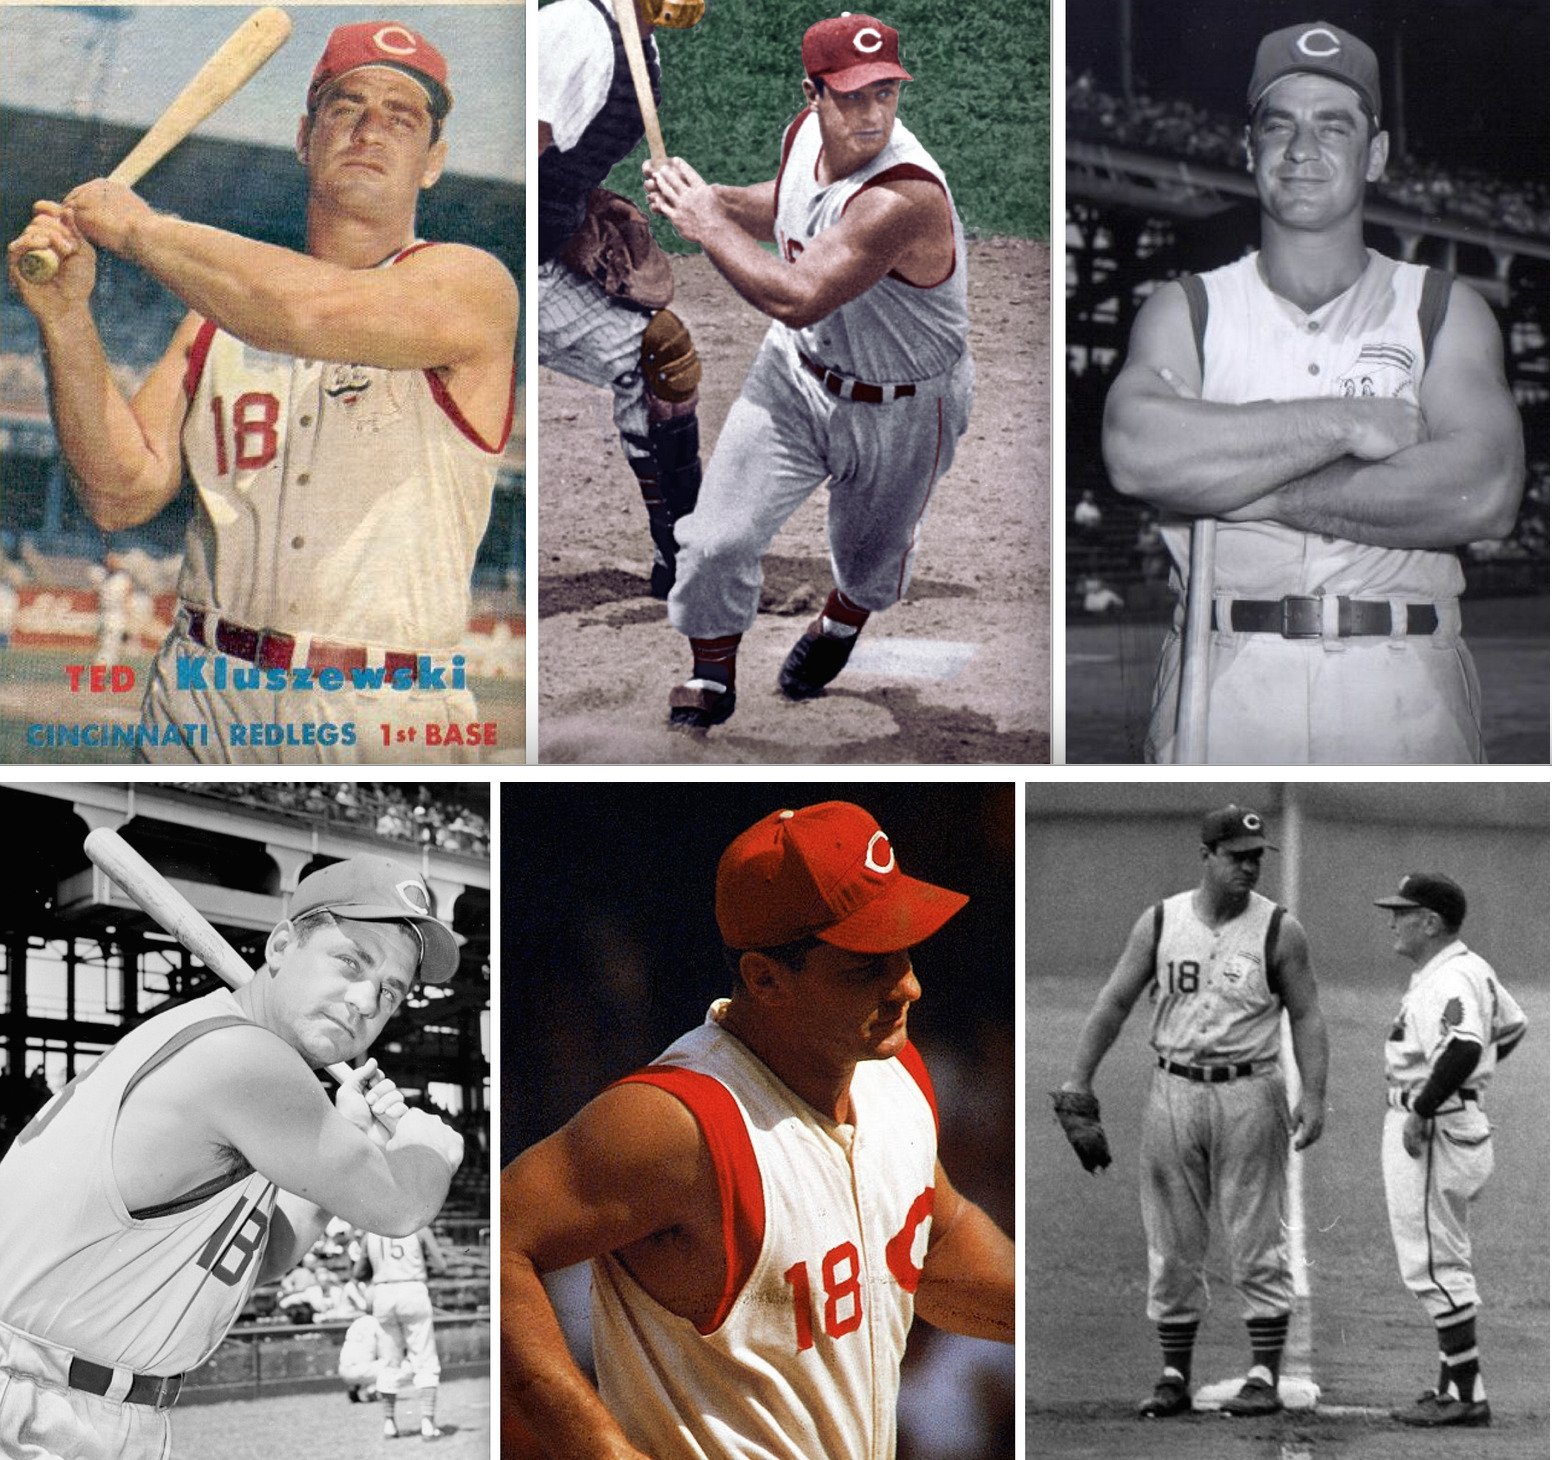 Paul Lukas on X: Ted Kluszewski: the ultimate sleeveless ballplayer. Vest  jersey and sleeves torn off of his undershirt.  / X